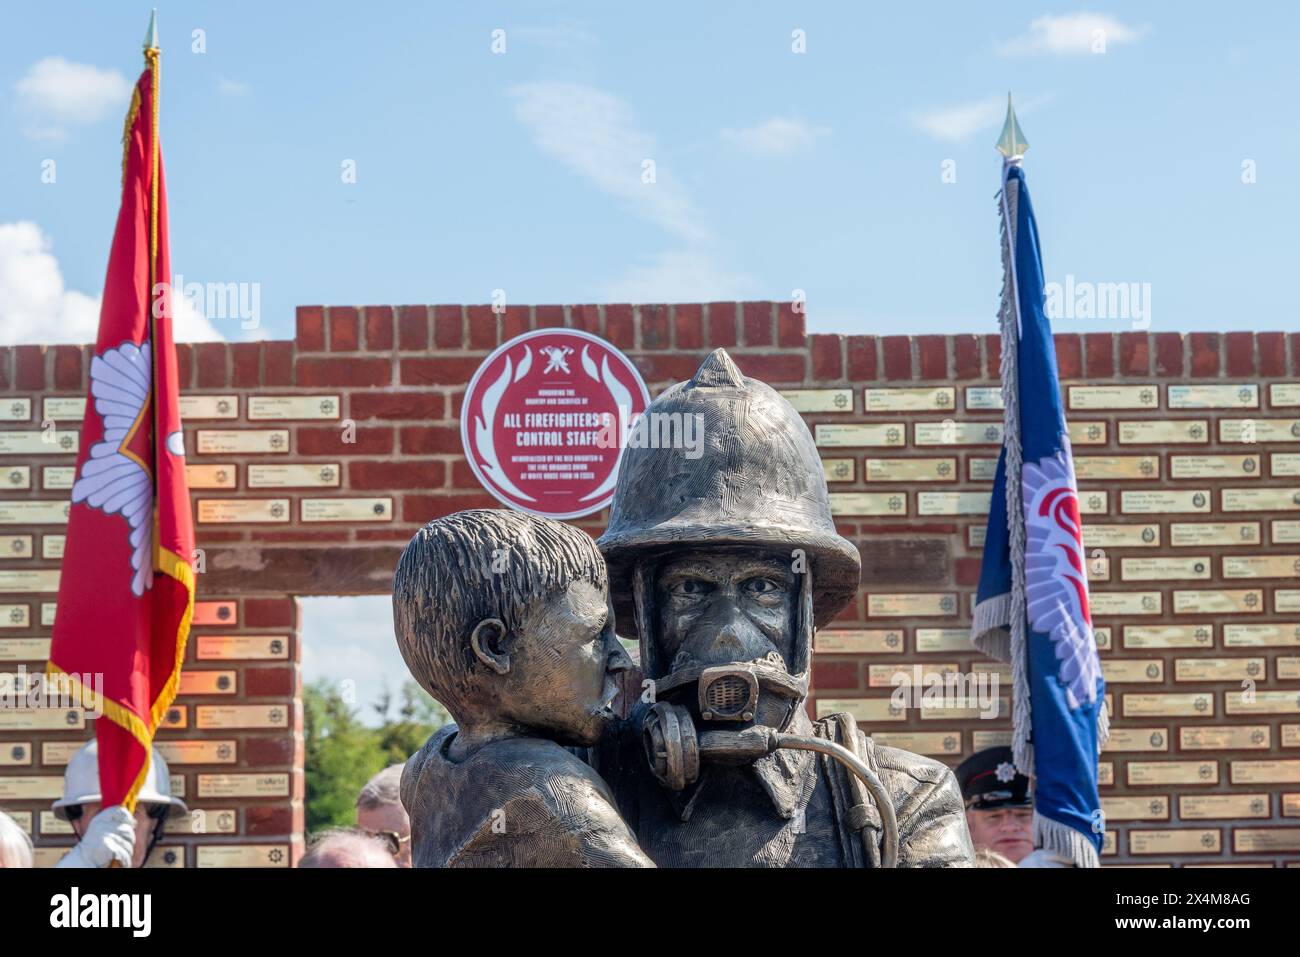 Rettendon, Chelmsford, Essex, UK. 4th May 2024. On International Firefighters' Day a statue, memorial wall & gardens have been opened to honour the bravery & sacrifice of firefighters in the UK. The centrepiece firefighter bronze figure was sculpted by artist Dave Taylor, while the National Red Plaque Firefighter Memorial honours individuals that have served. The site also includes landscaped gardens & a vintage Fire Appliance. The project has been supported by Fire Brigades Union, Essex County Fire & Rescue Service & many businesses & members of the public. Credit: Avpics/Alamy Live News Stock Photo